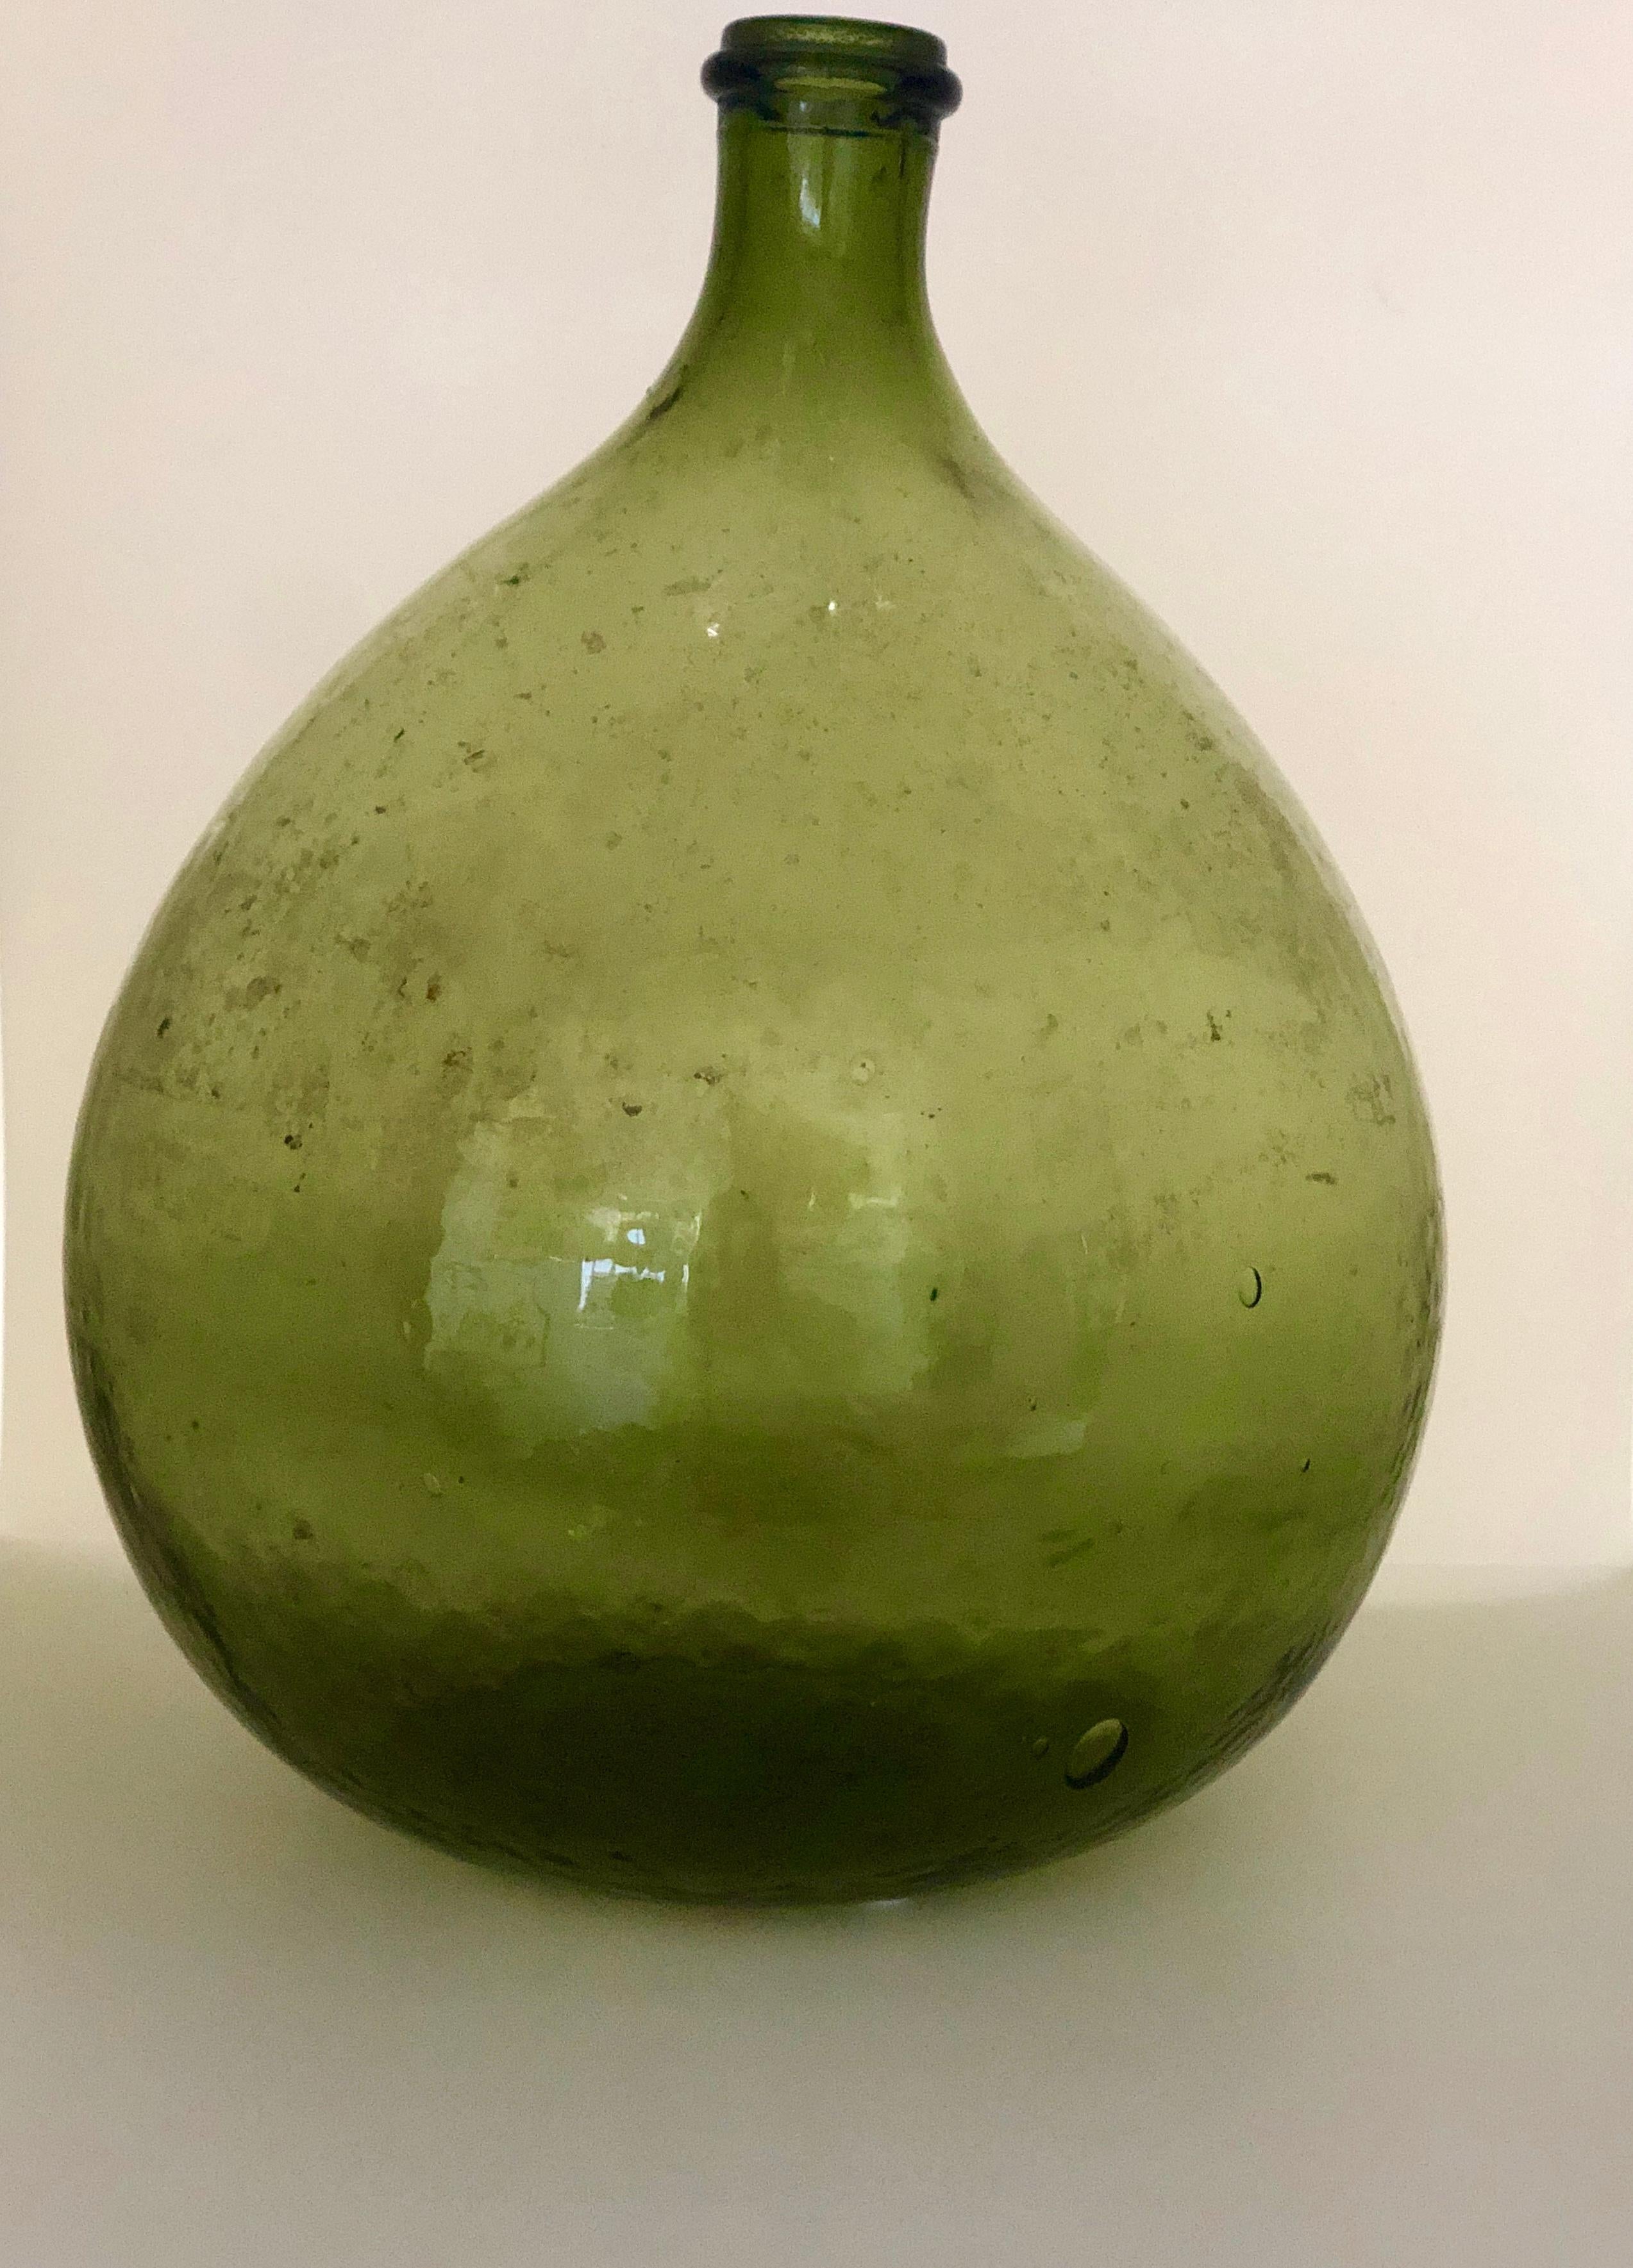 Offered is a Mid-Century Modern Peridot green vintage optical glass wine jug manufactured in Argentina. Fabulous color! Would look great as an accent piece with any type of decor. Recently saw several of these used in common area decor in a luxury